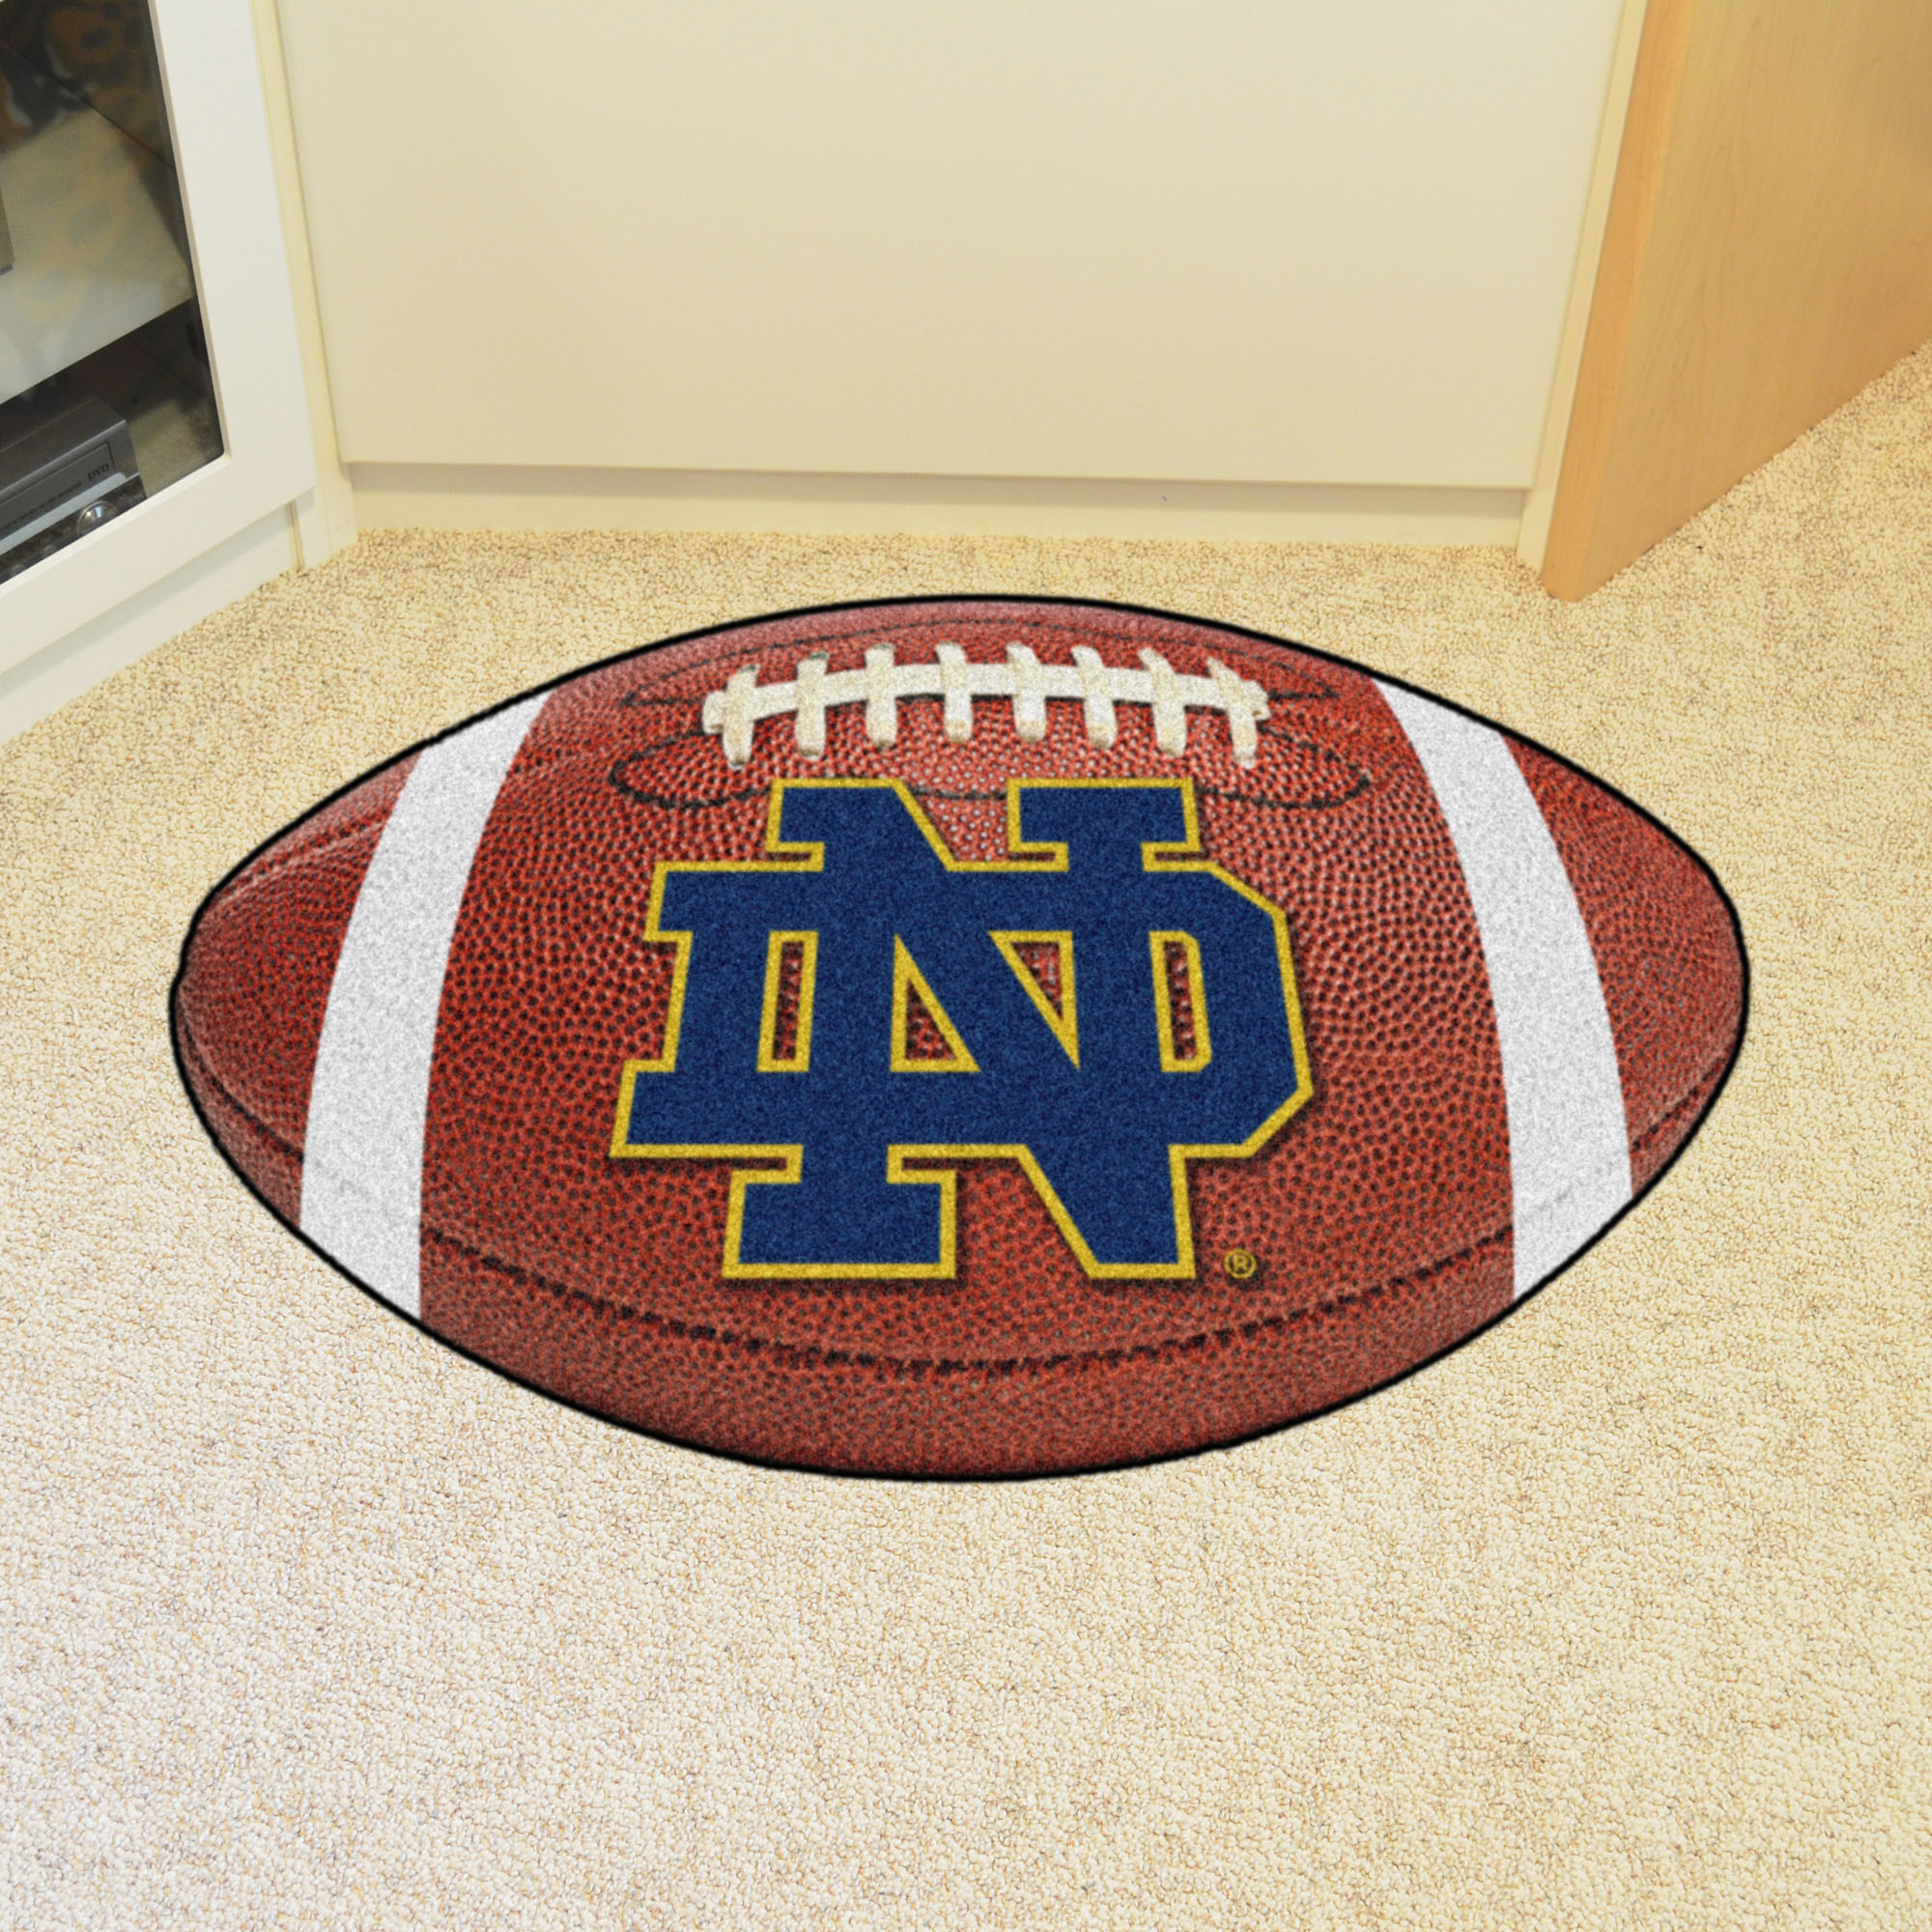 University of Notre Dame Ball Shaped Area Rugs (Ball Shaped Area Rugs: Football)